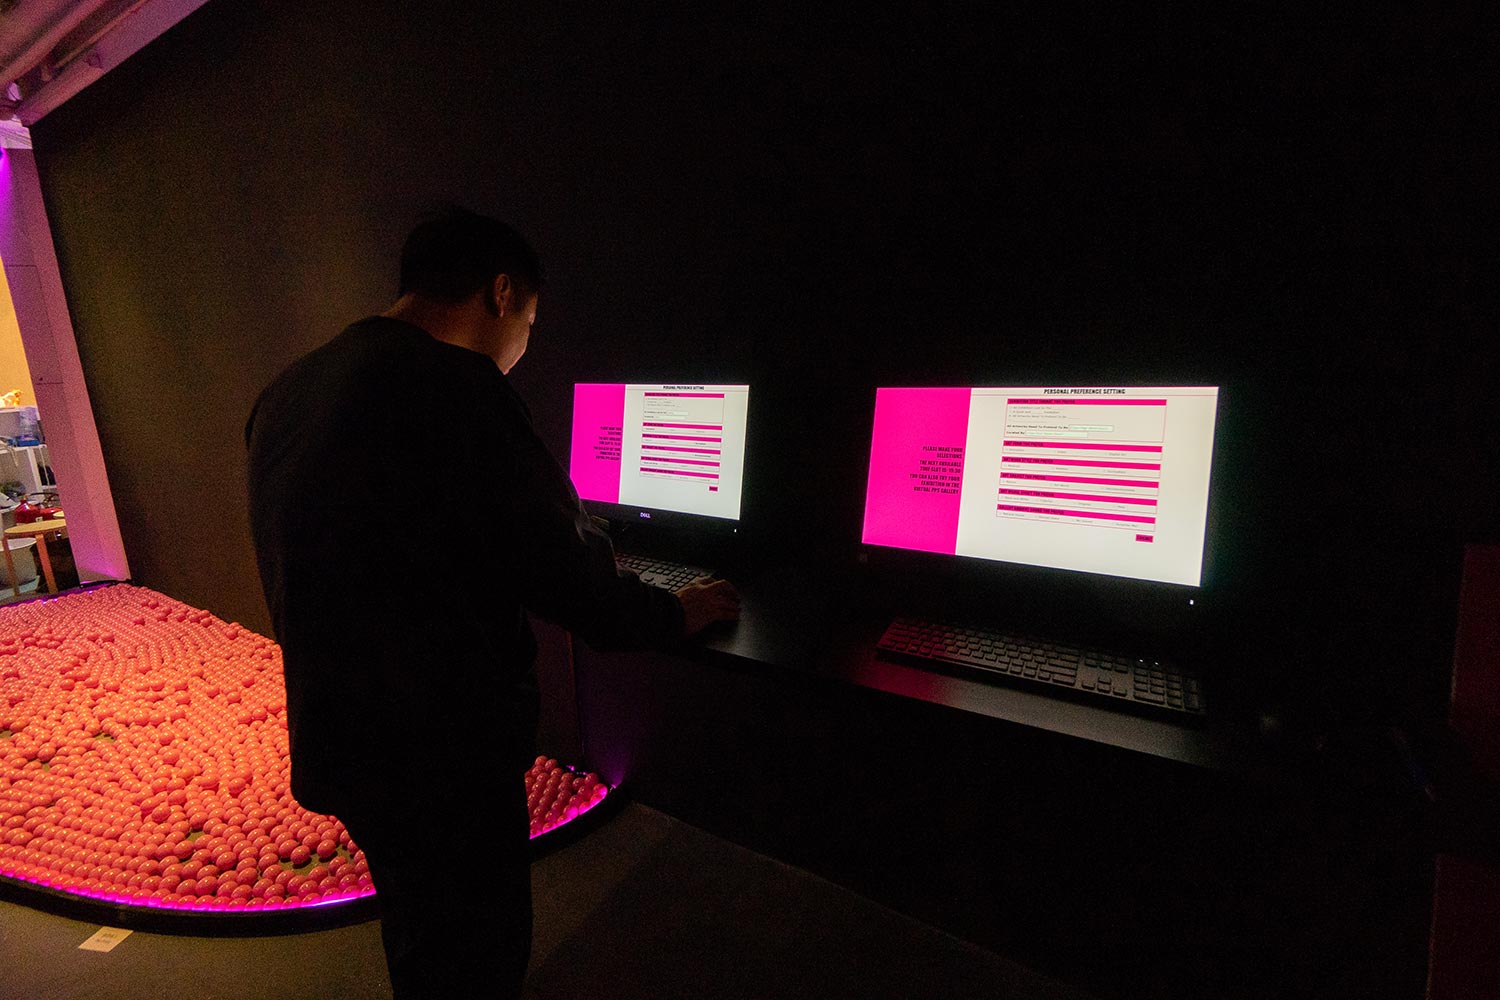 K11 visitor creating a custom exhibition using on-screen forms